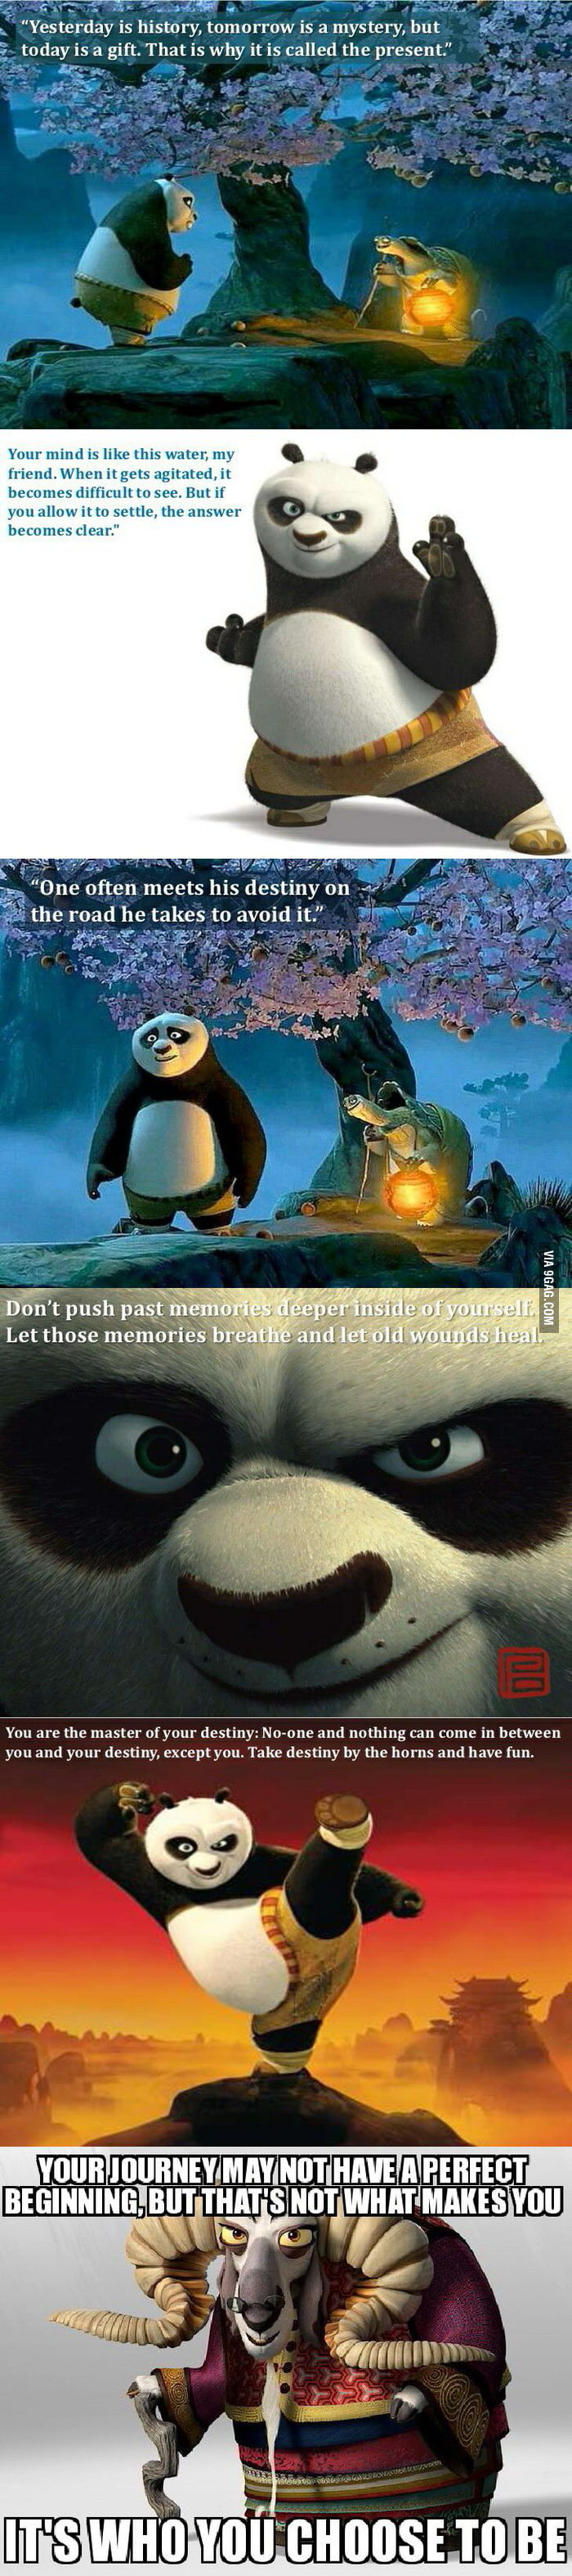 Kung Fu Panda Had Some Of The Best Life Quotes 9gag 